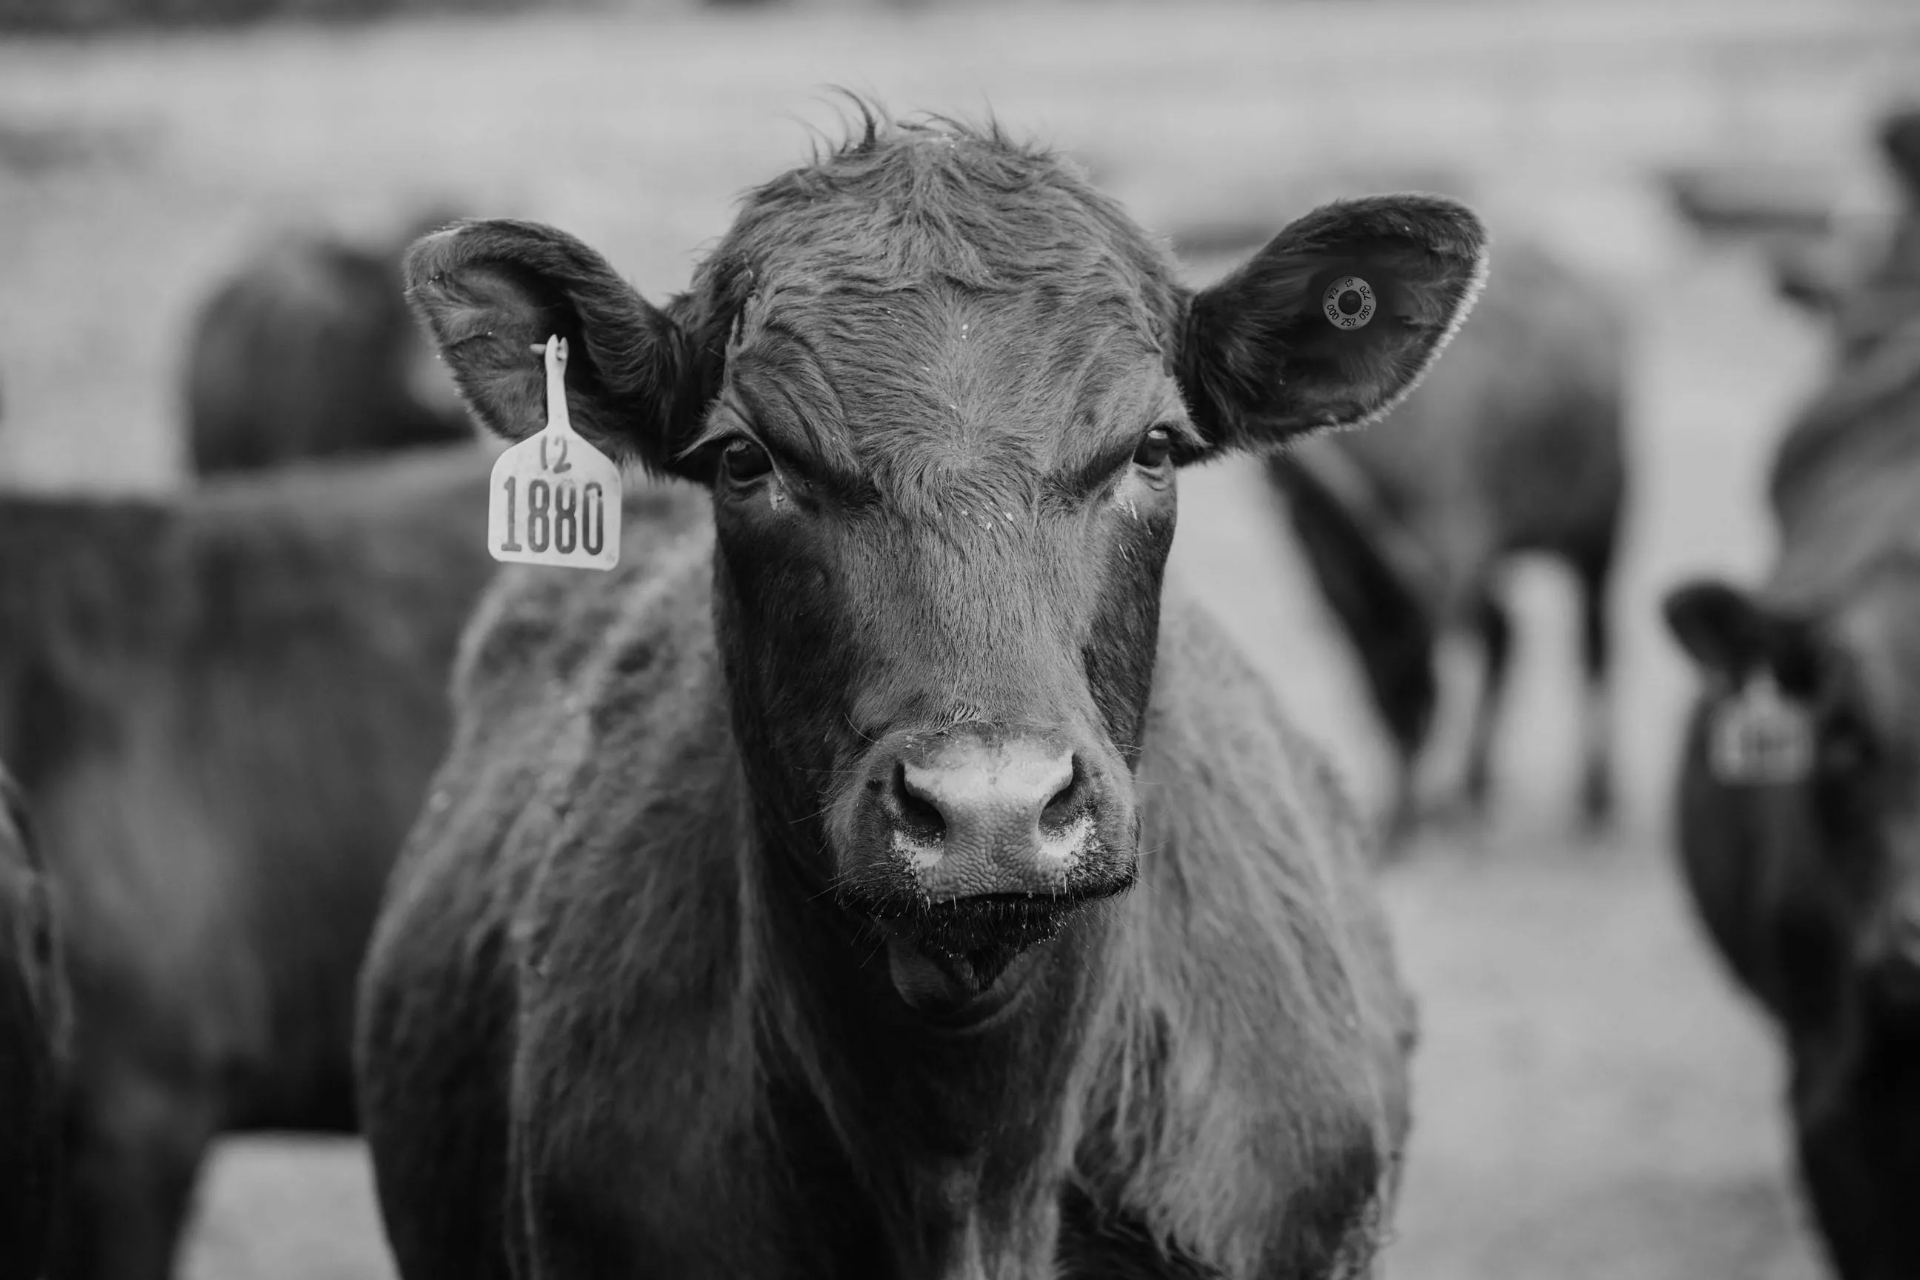 A black and white photo of a cow with a tag on its ear.